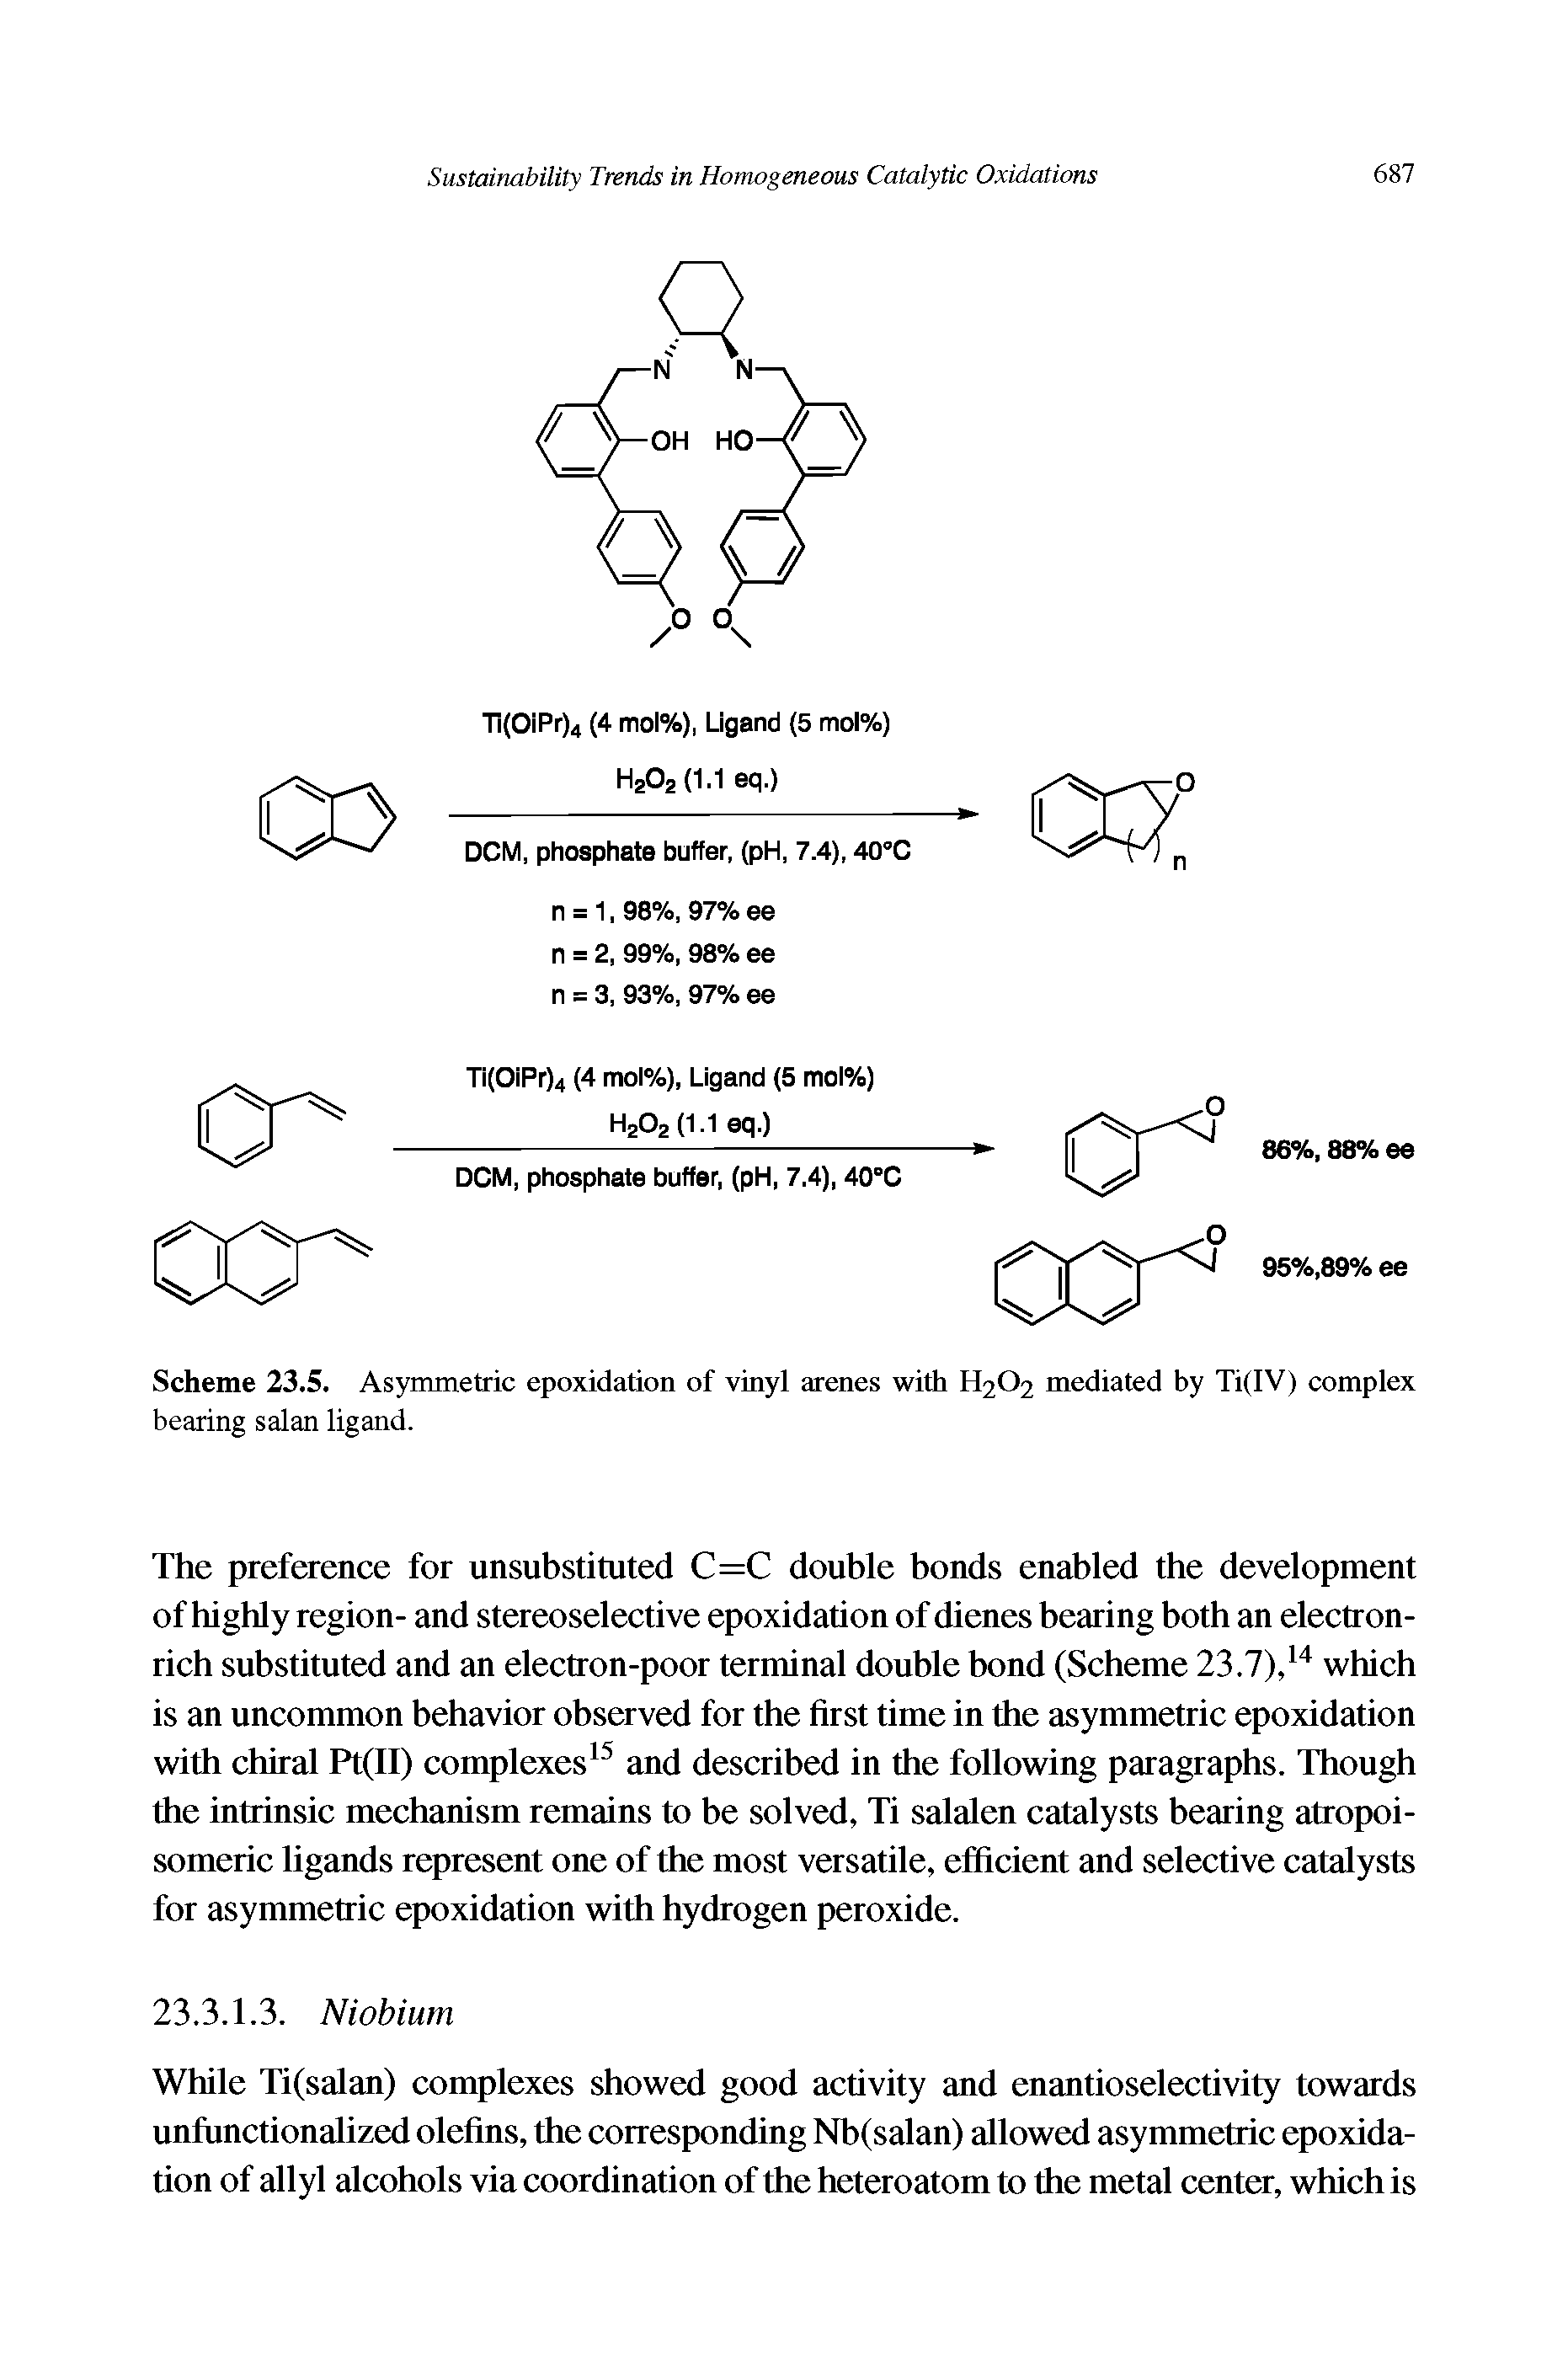 Scheme 23.5. Asymmetric epoxidation of vinyl arenes with H2O2 mediated by Ti(IV) complex bearing salan ligand.